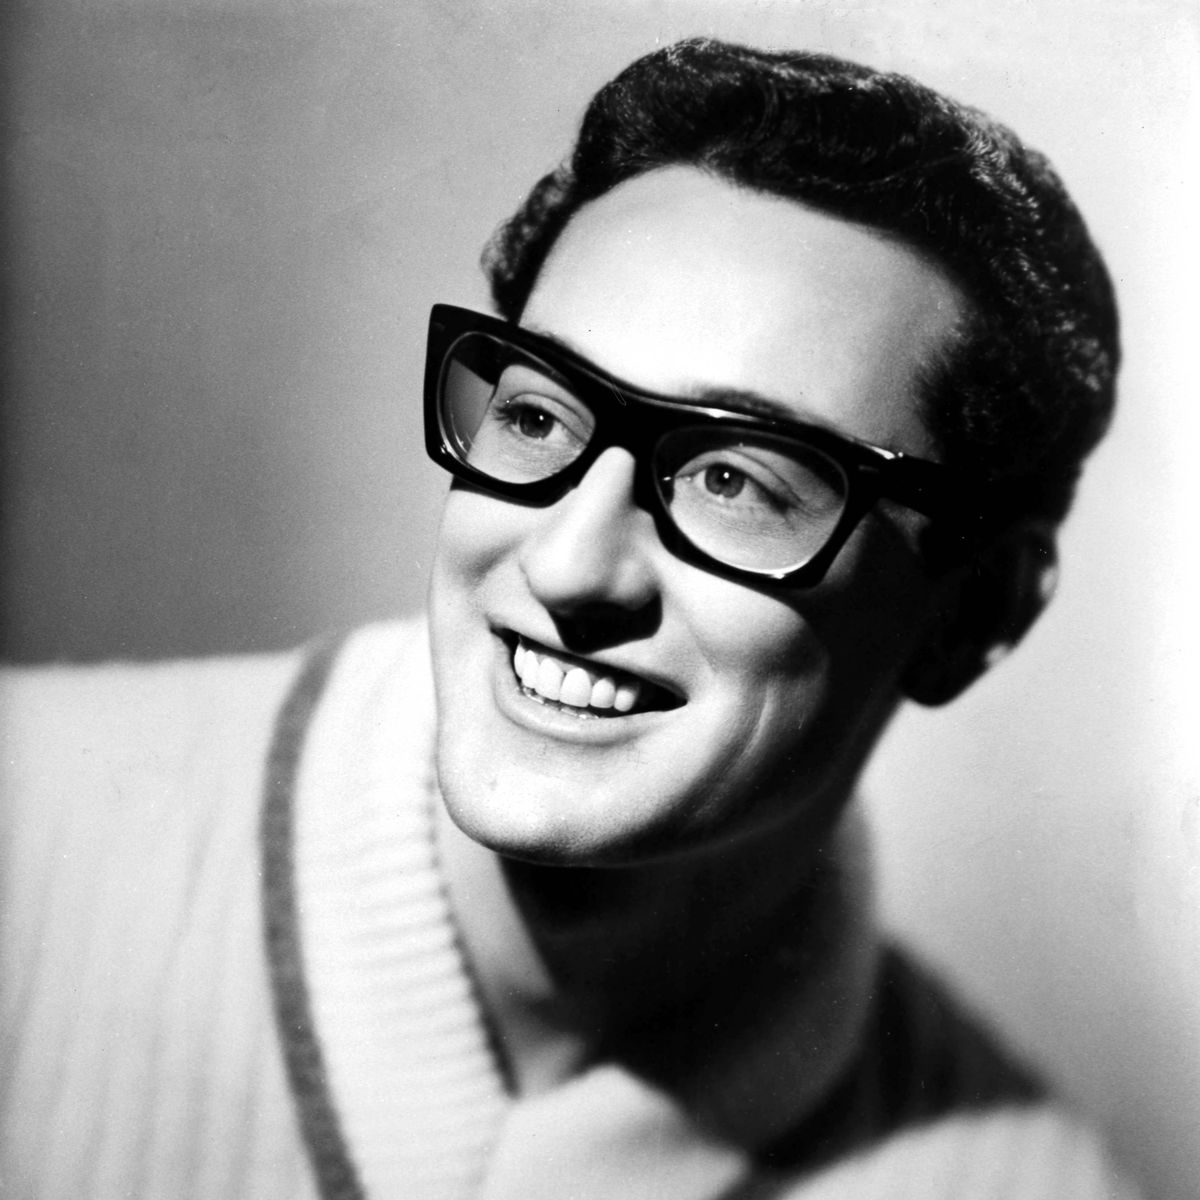 Photo of Buddy HOLLYUNSPECIFIED - JANUARY 01: Photo of Buddy HOLLY; Posed studio portrait of Buddy Holly (Photo by RB/Redferns)